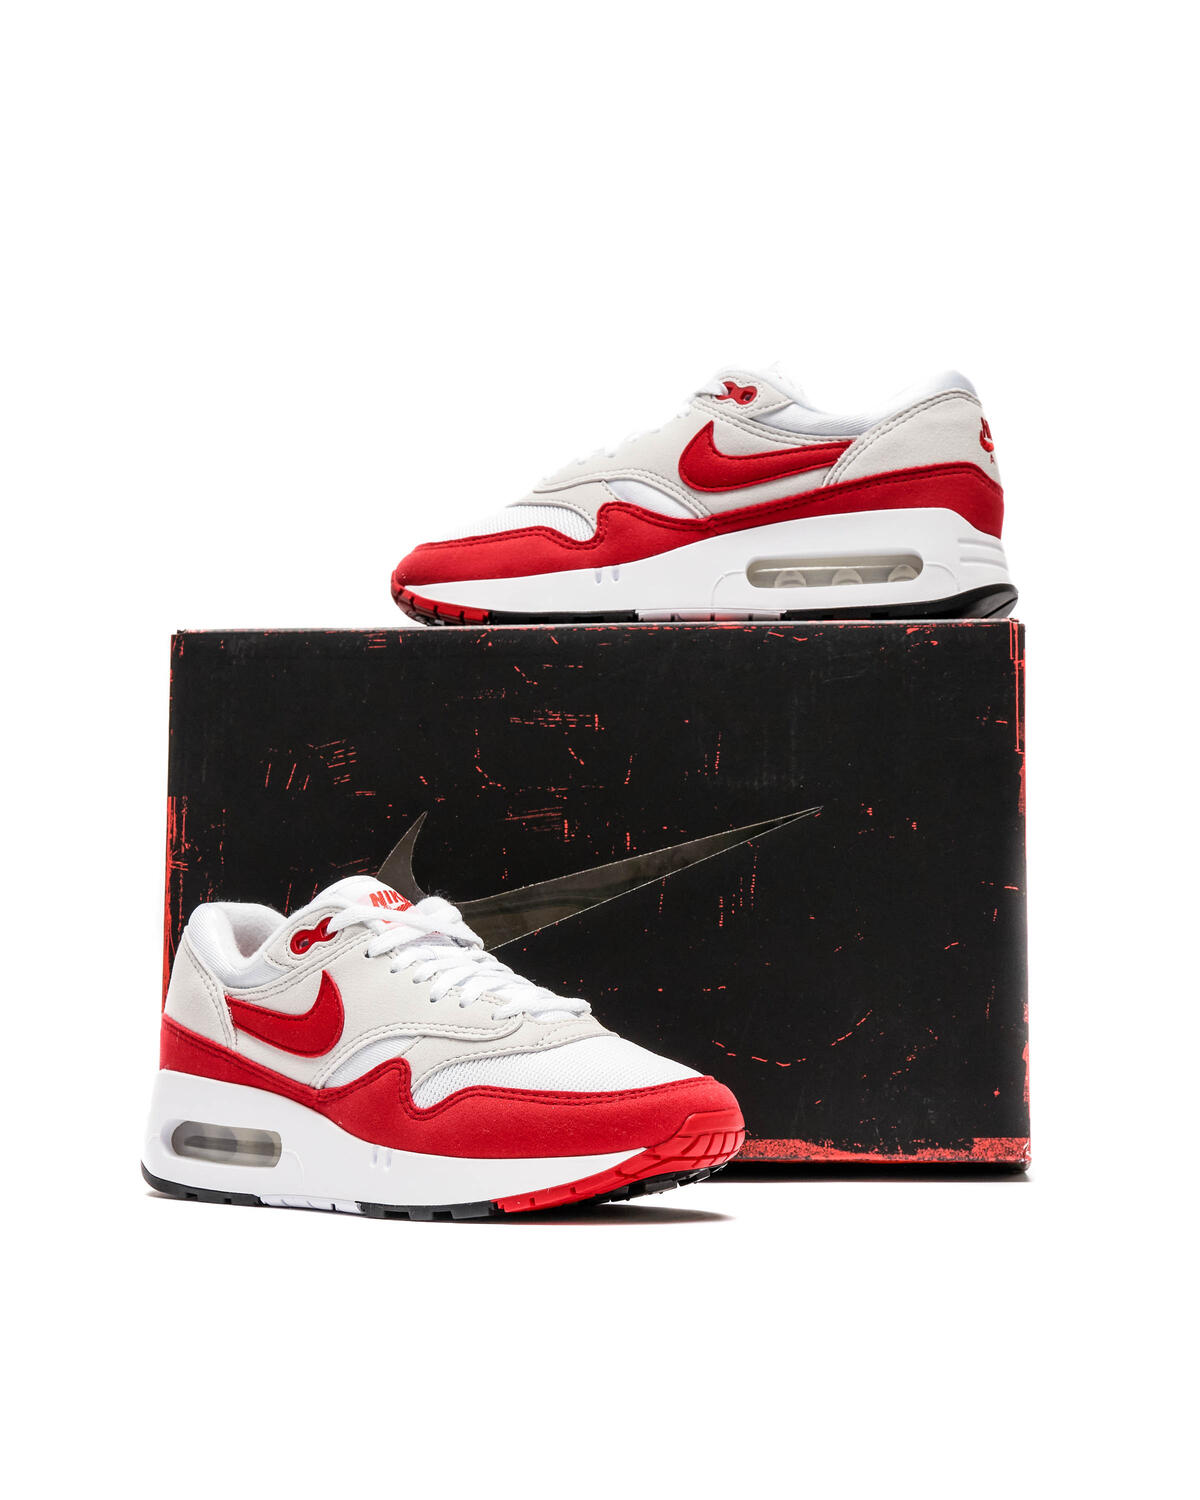 Nike Air Max 1 '86 OG 'University Red' WMNS / Big Bubble - DO9844-100 -  SneakerMood - Your favorite sneaker provider